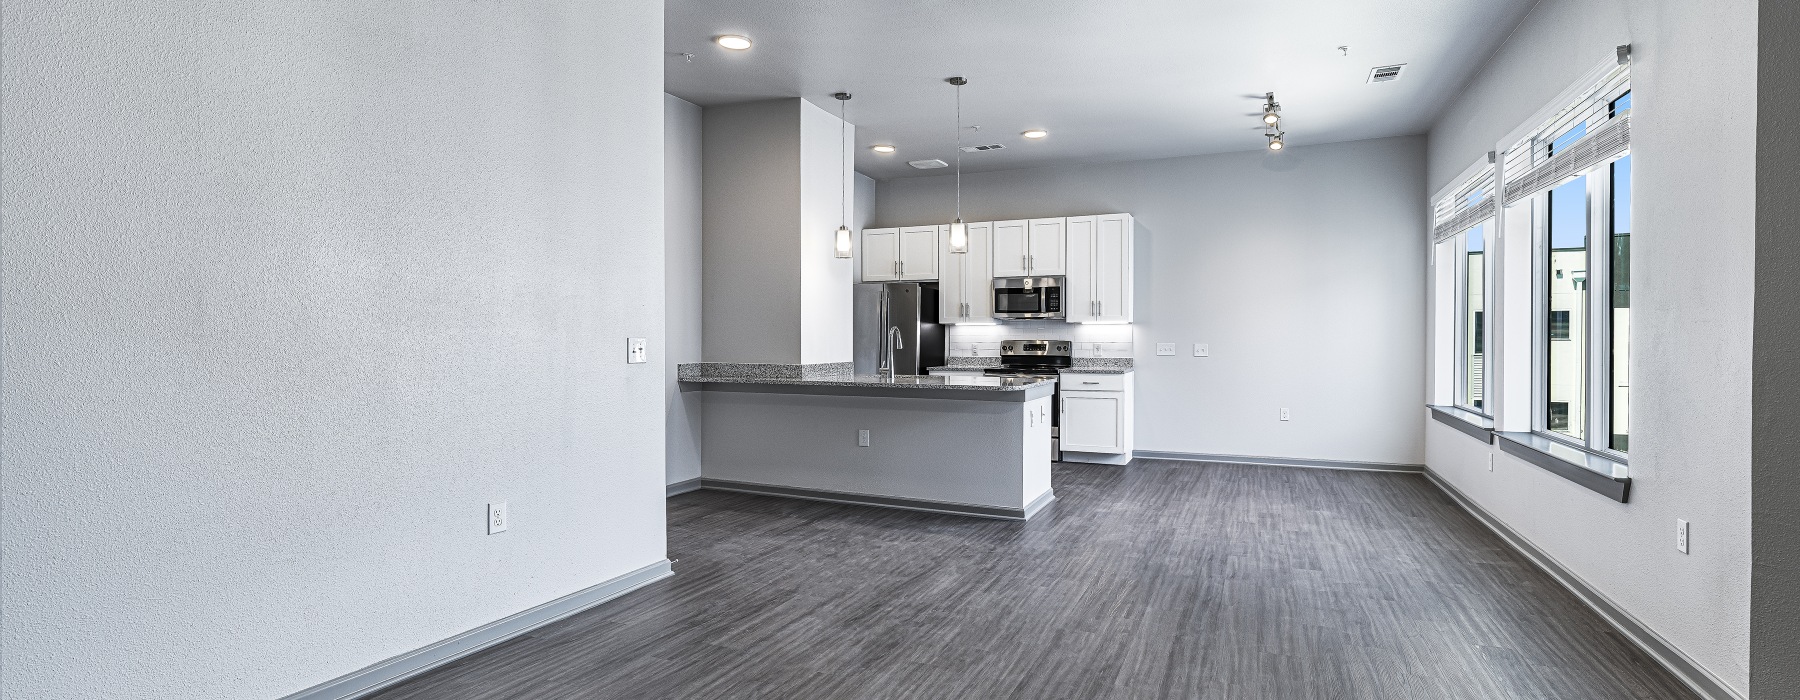 Interior phot featuring grey faux wood flooring, stainless steel appliances, and and tons of natural light. 